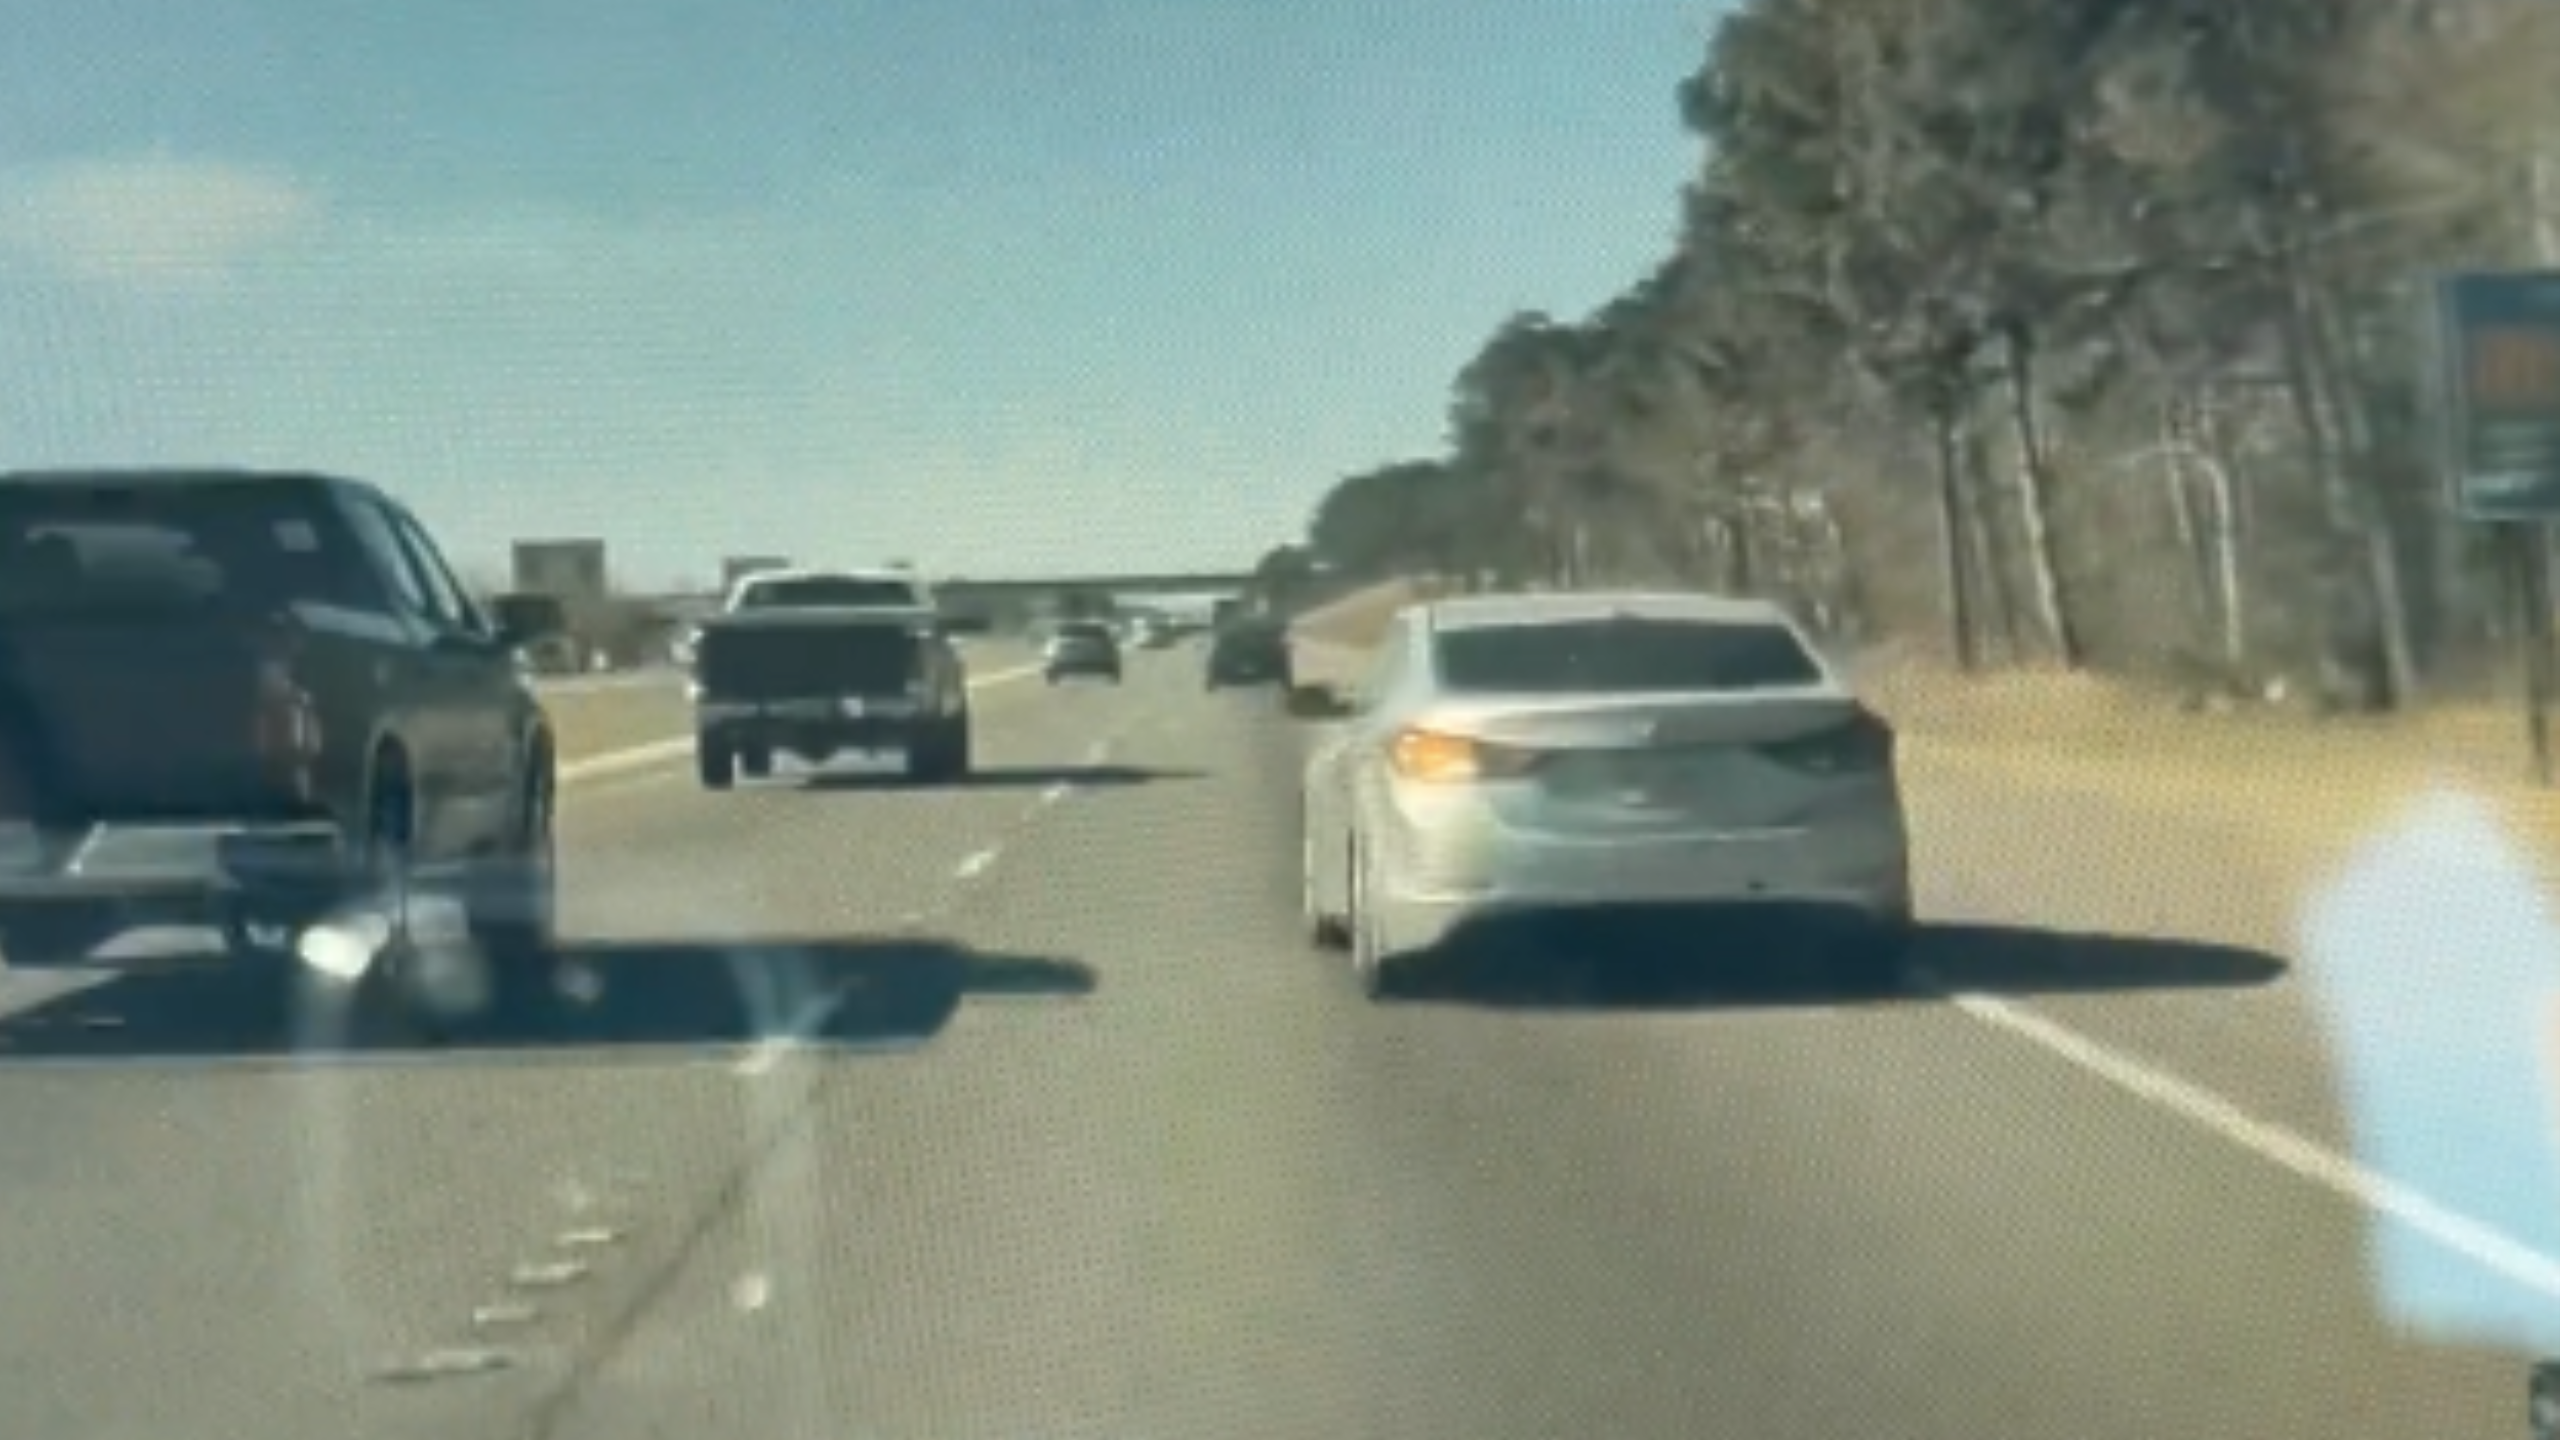 A Tesla Model 3 owner is thanking Tesla’s Full Self-Driving (FSD) Beta for slowing down and safely avoiding an accident along I-10 in Baton Rouge, Louisiana, on Saturday.